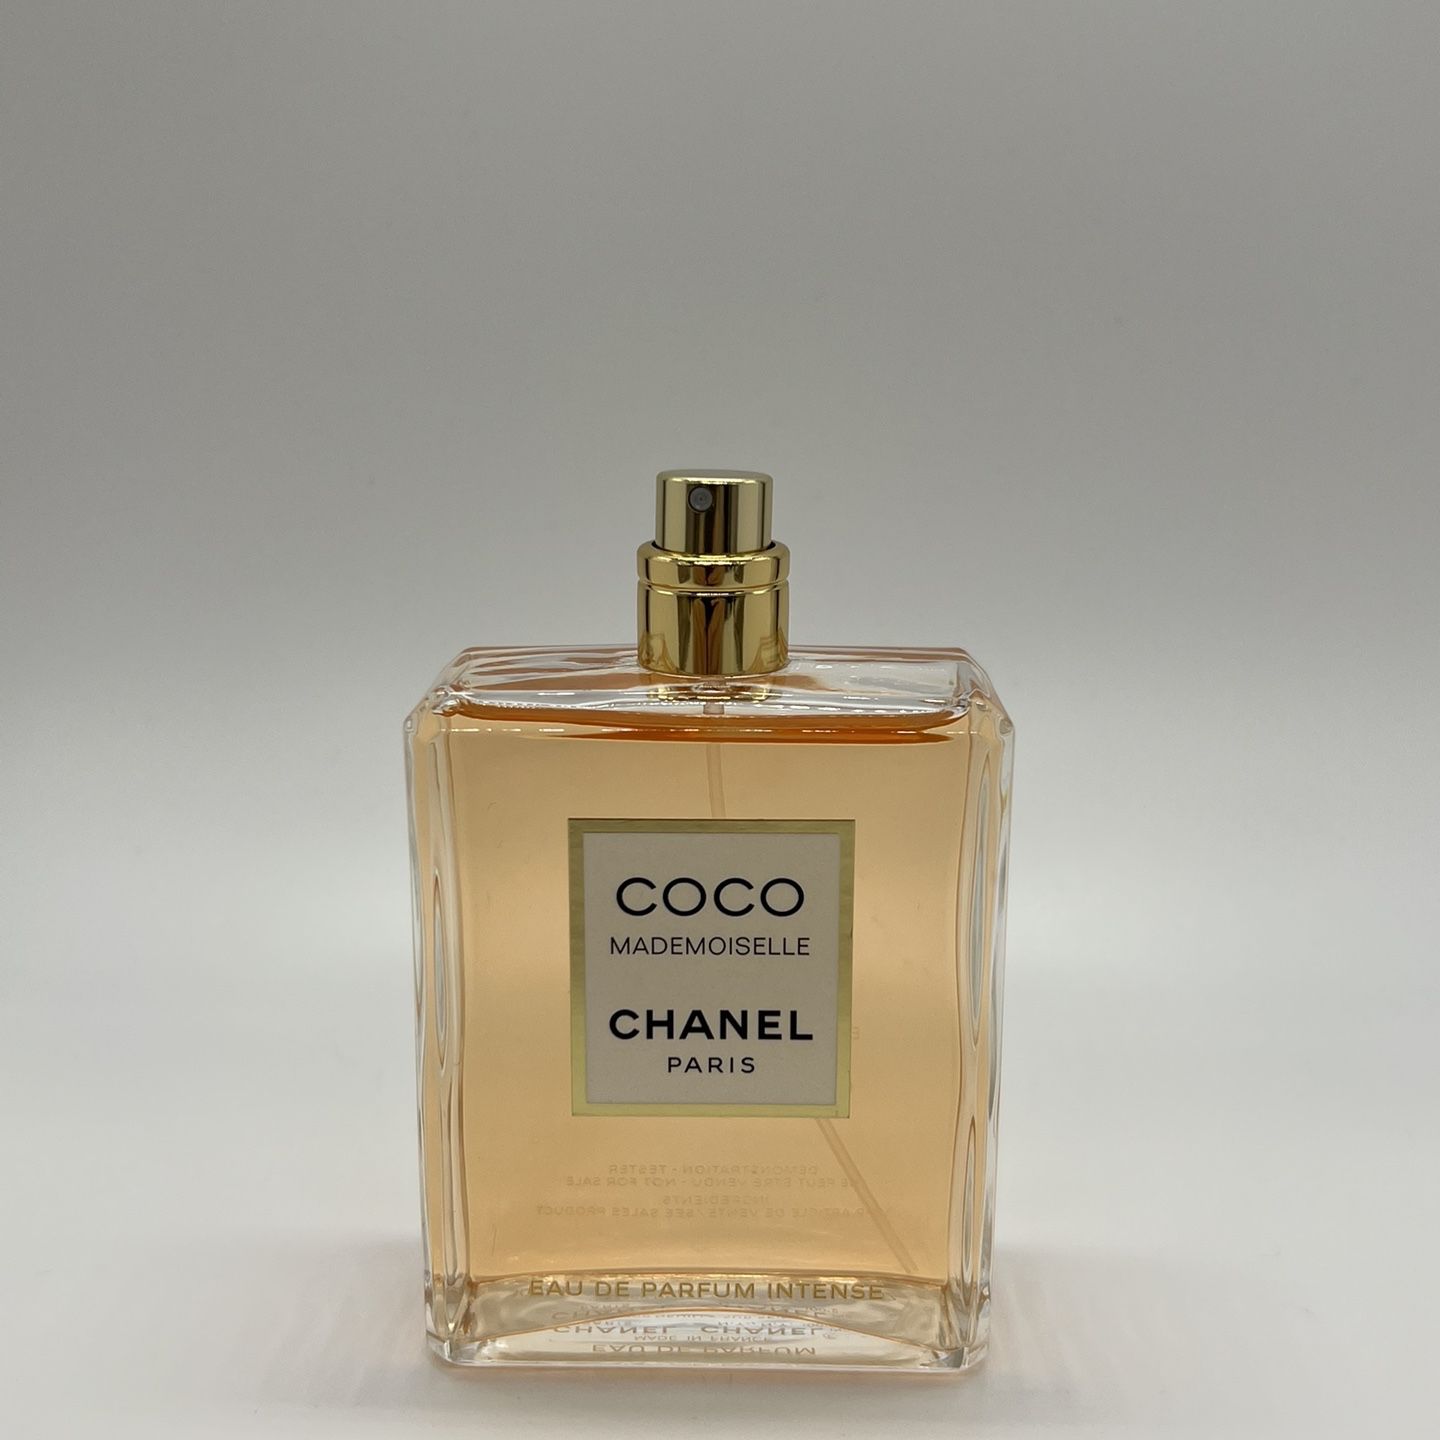 Best Chanel Coco Mademoiselle Gift Set for sale in Austin, Texas for 2023